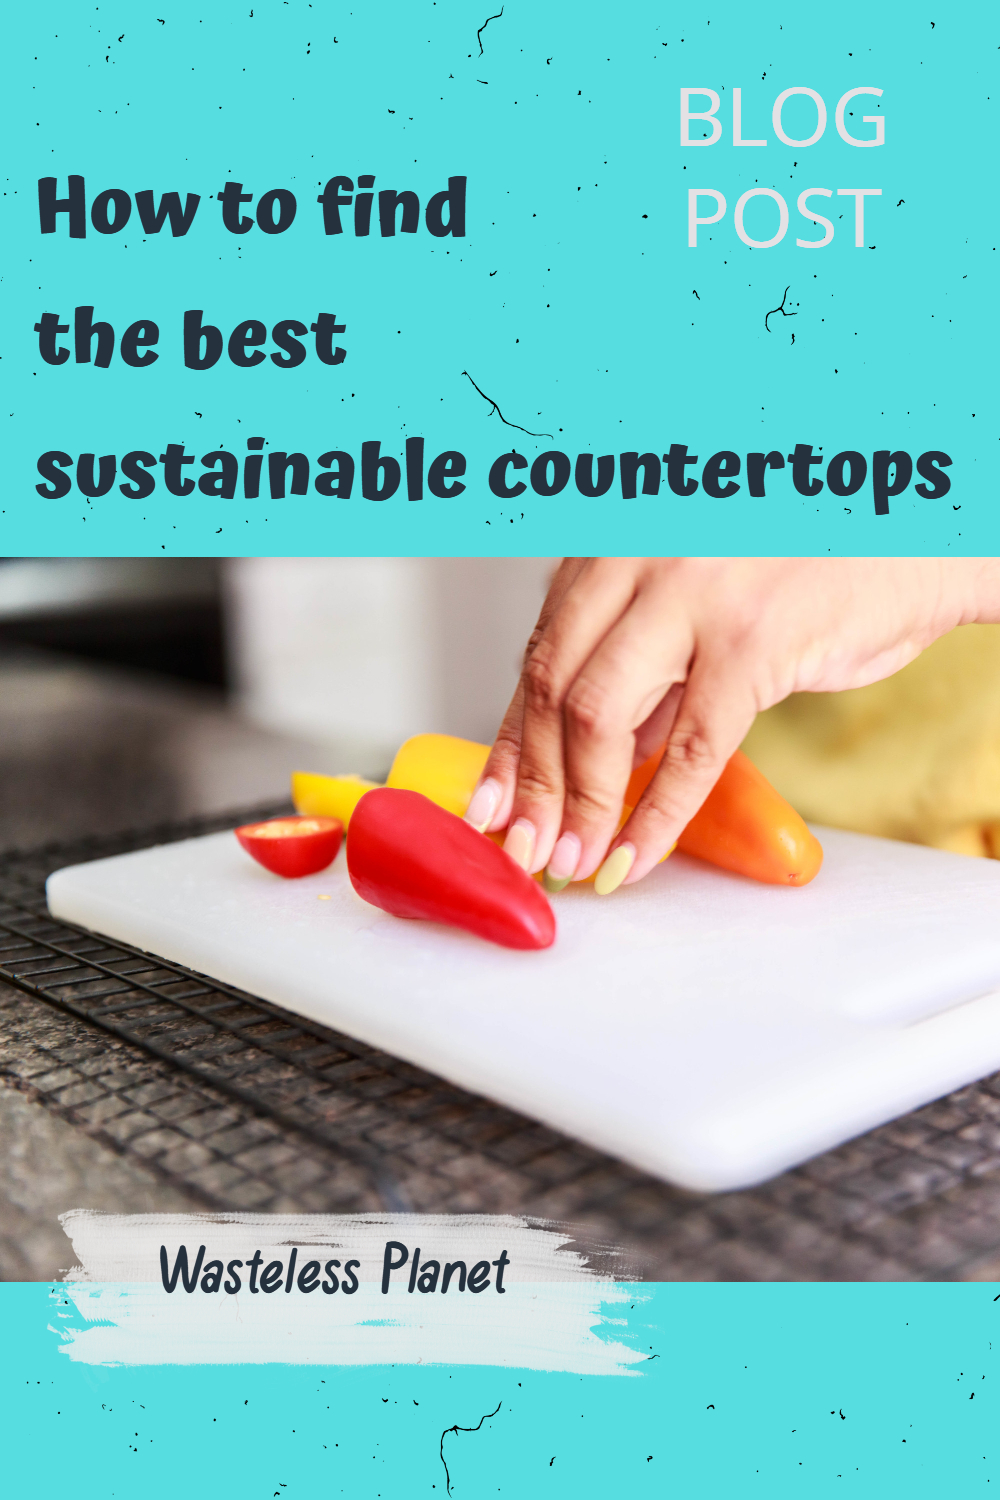 How to find the best sustainable countertops